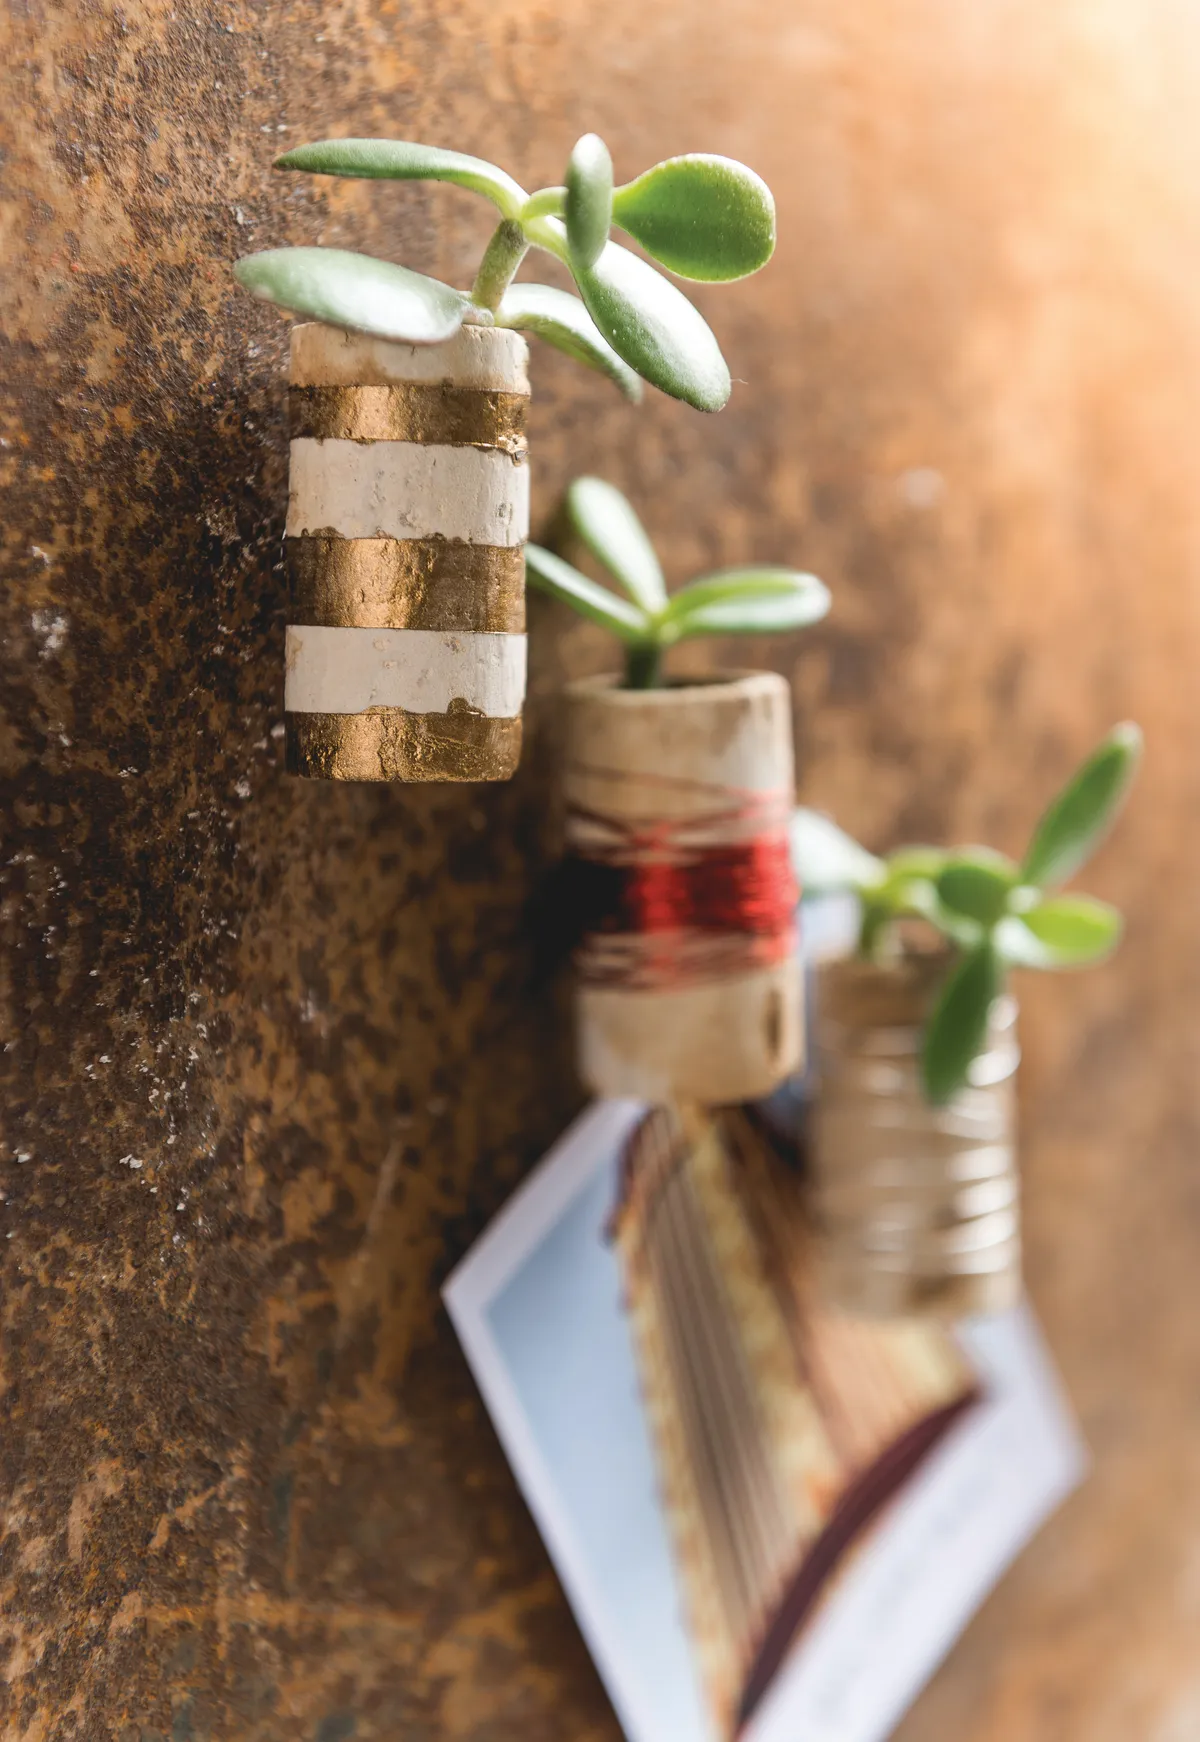 How to make cork planters